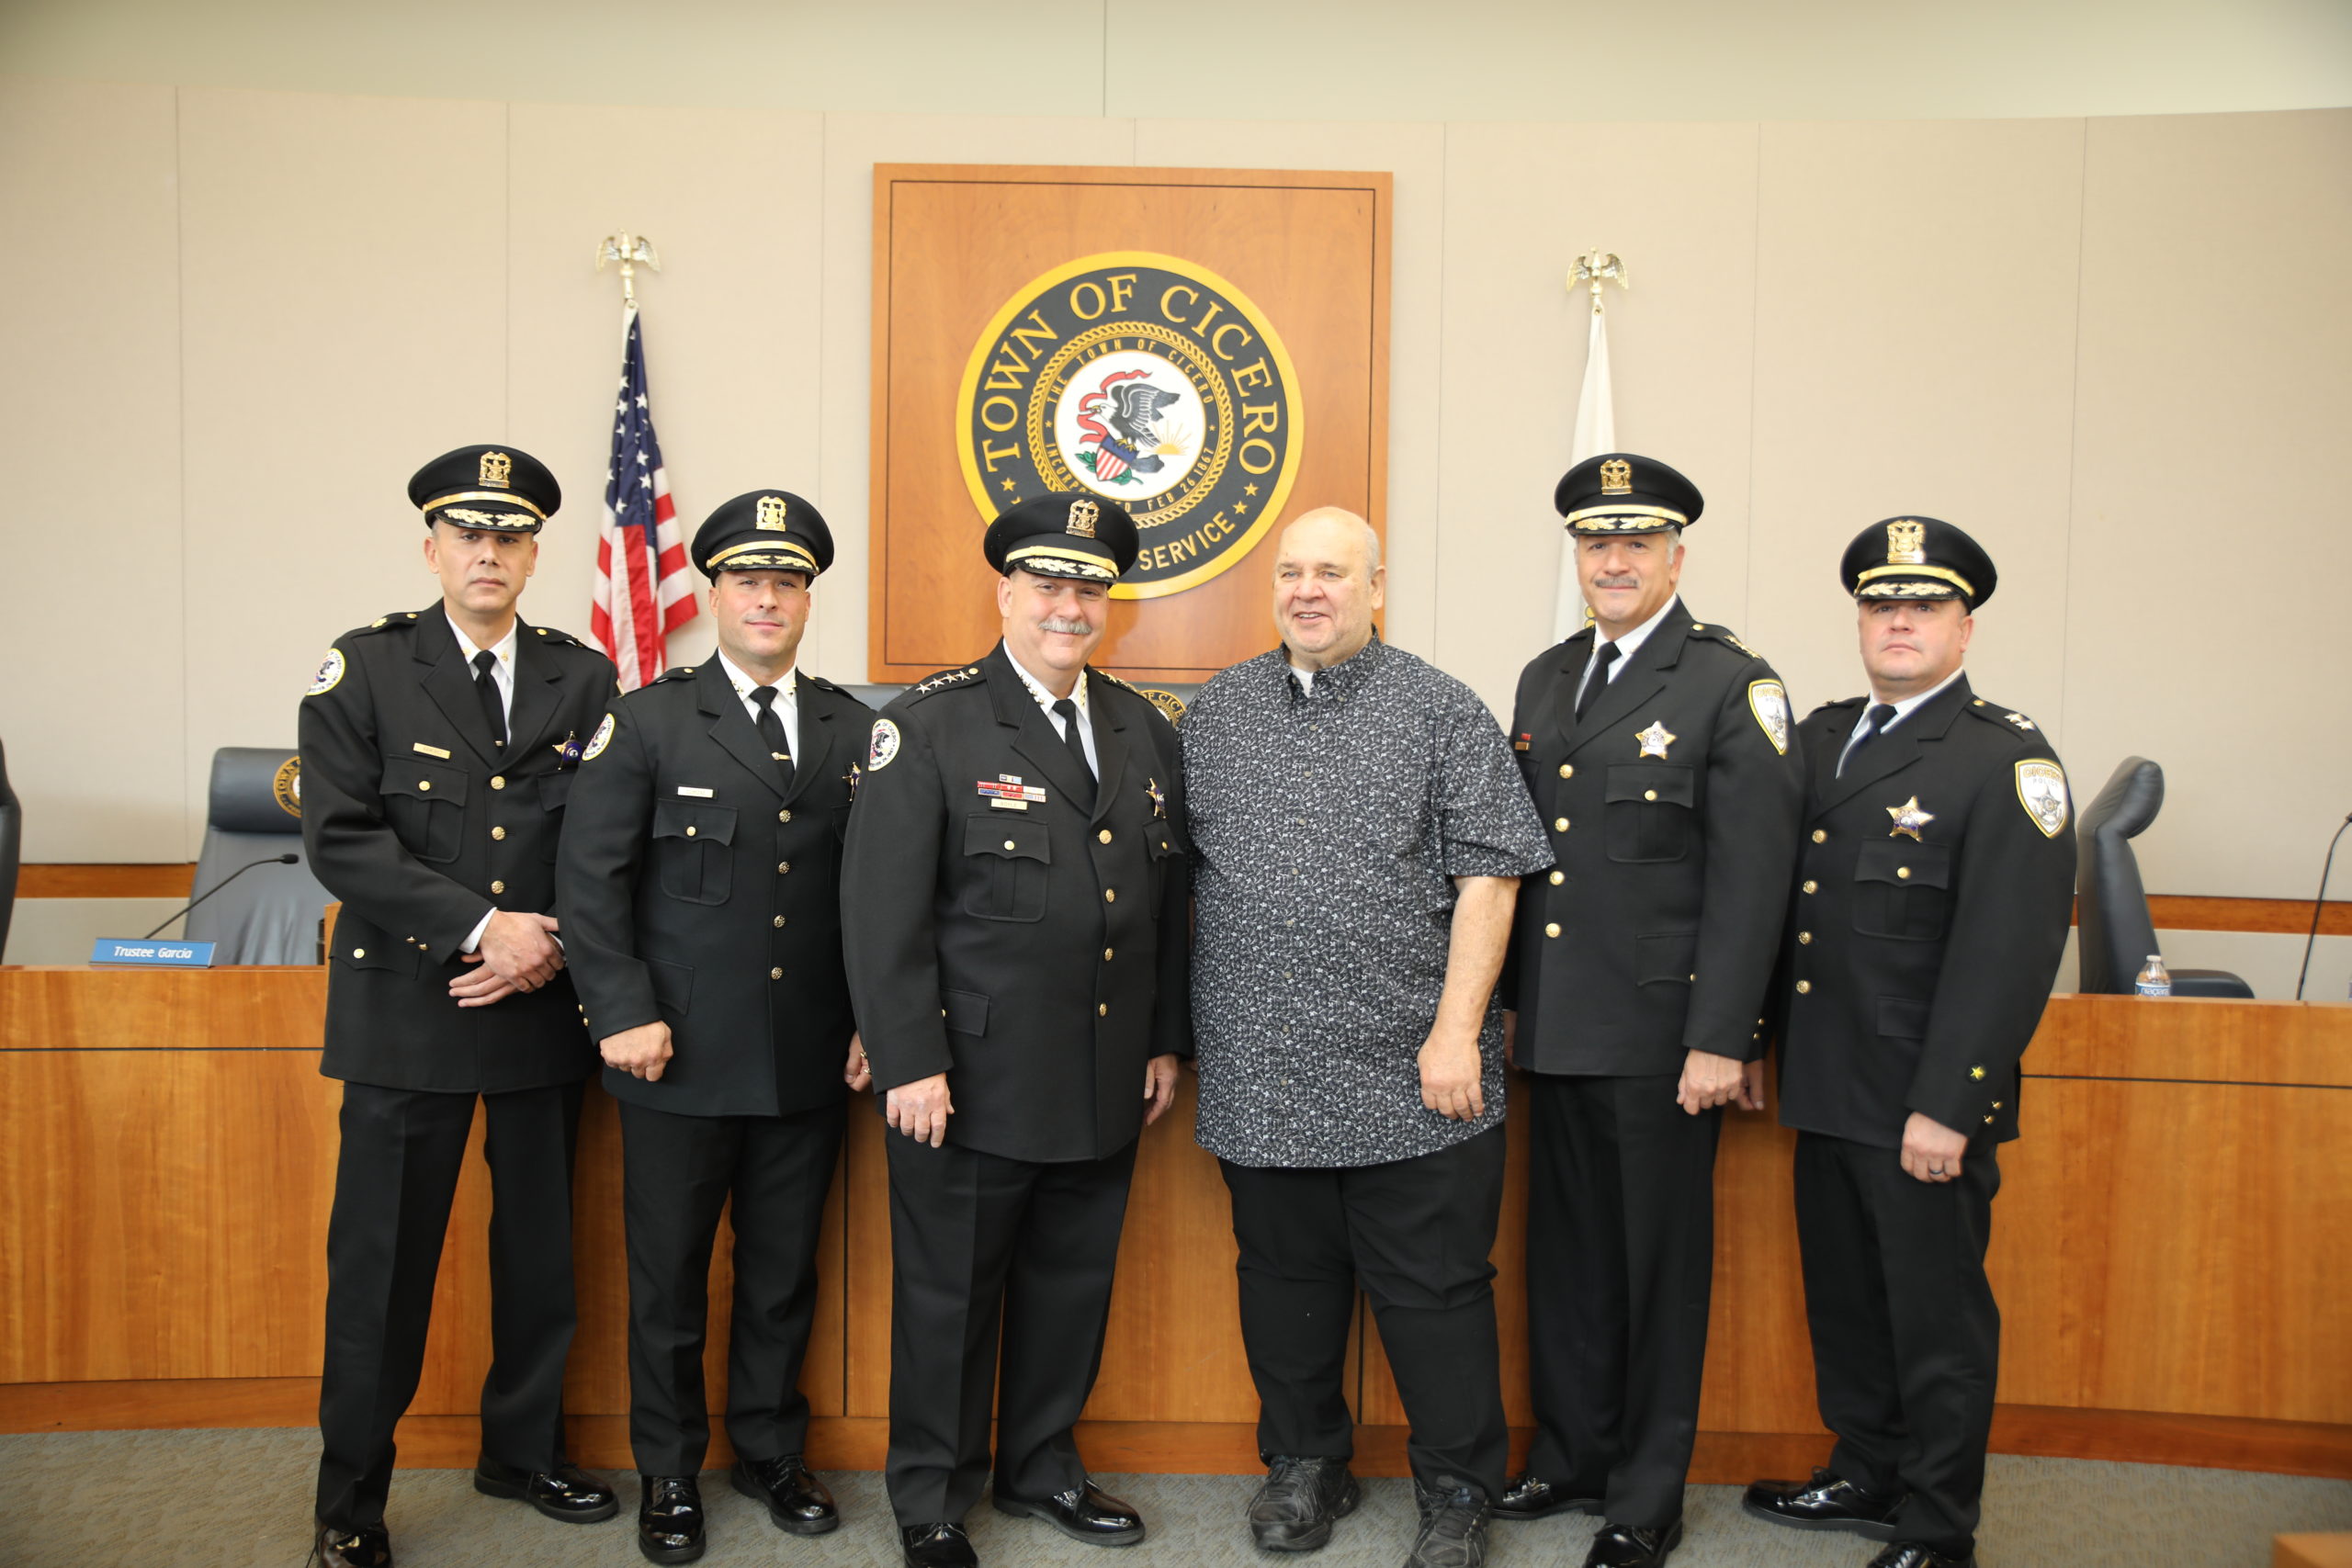 Town President Larry Dominick and the Town of Cicero Board of Trustees named Thomas P. Boyle as the town’s new Superintendent of Police at its meeting on Wednesday, Nov. 9, 2022. Boyle, who began his career in the Cicero Police Department in 1998 as Commander of the Internal Affairs Division, succeeds former Police Chief Jerry Chlada Jr., who retired in August.